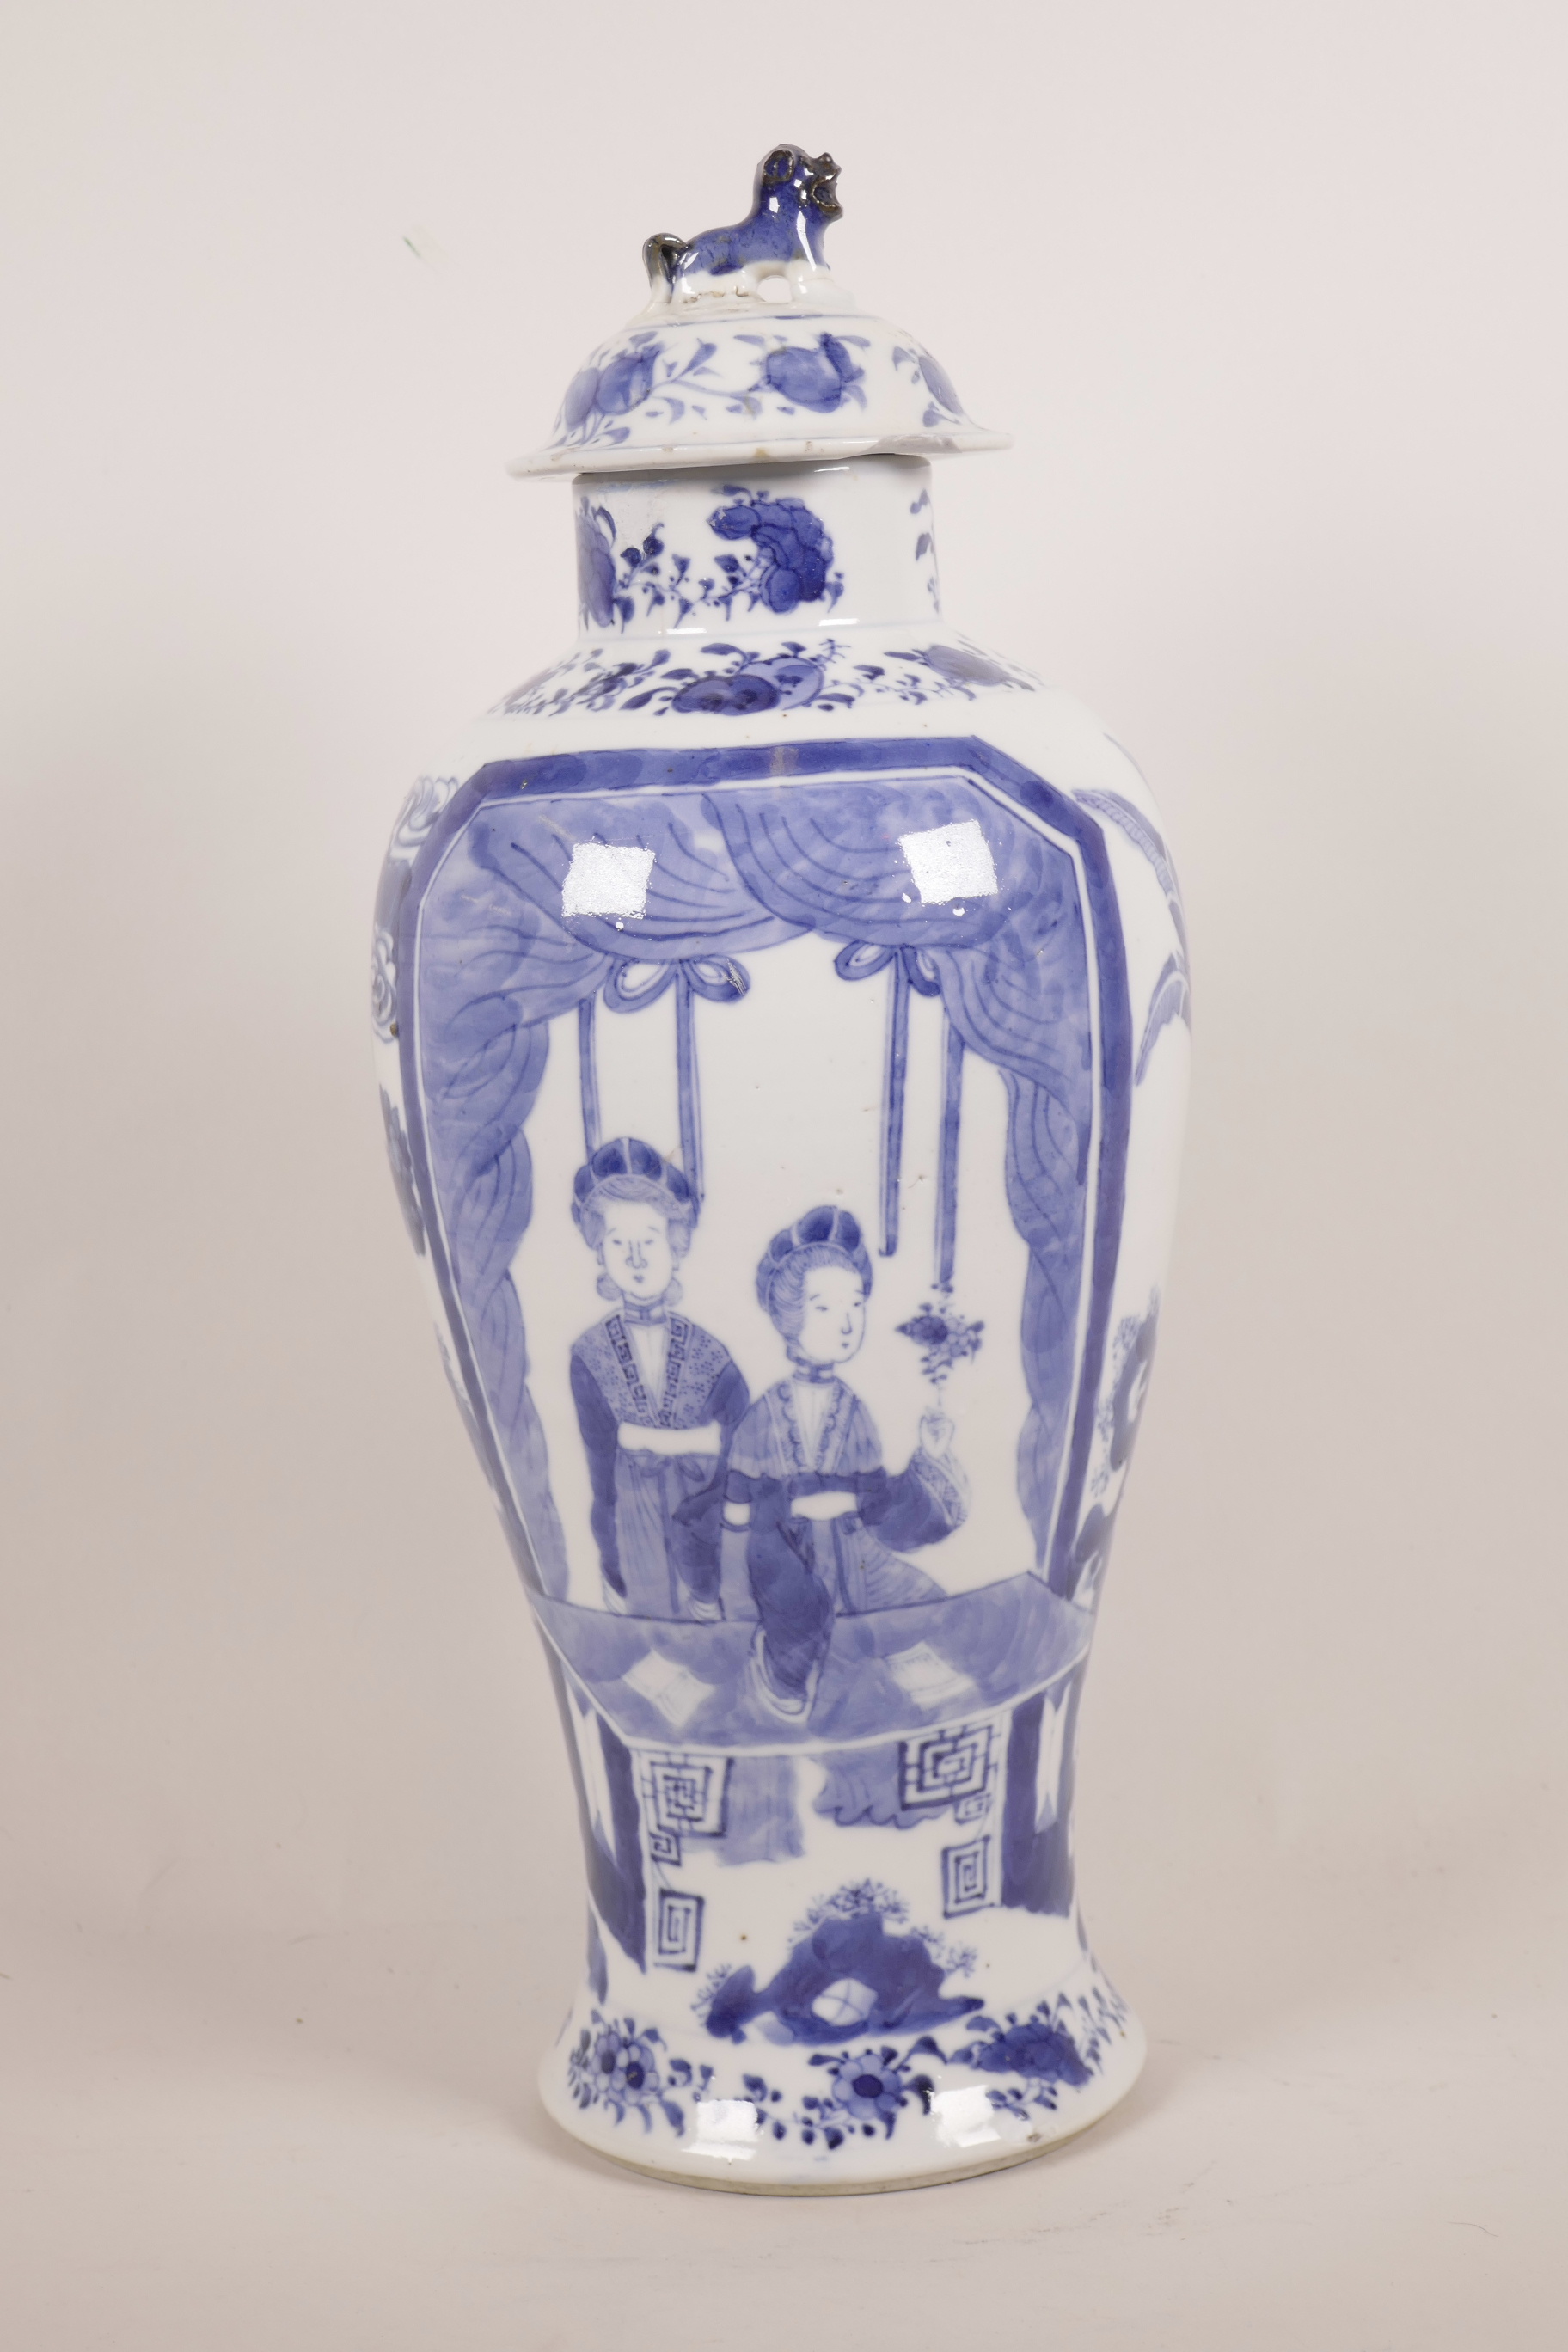 A C19th Chinese blue and white porcelain baluster vase and cover decorated with female figures in - Image 2 of 3